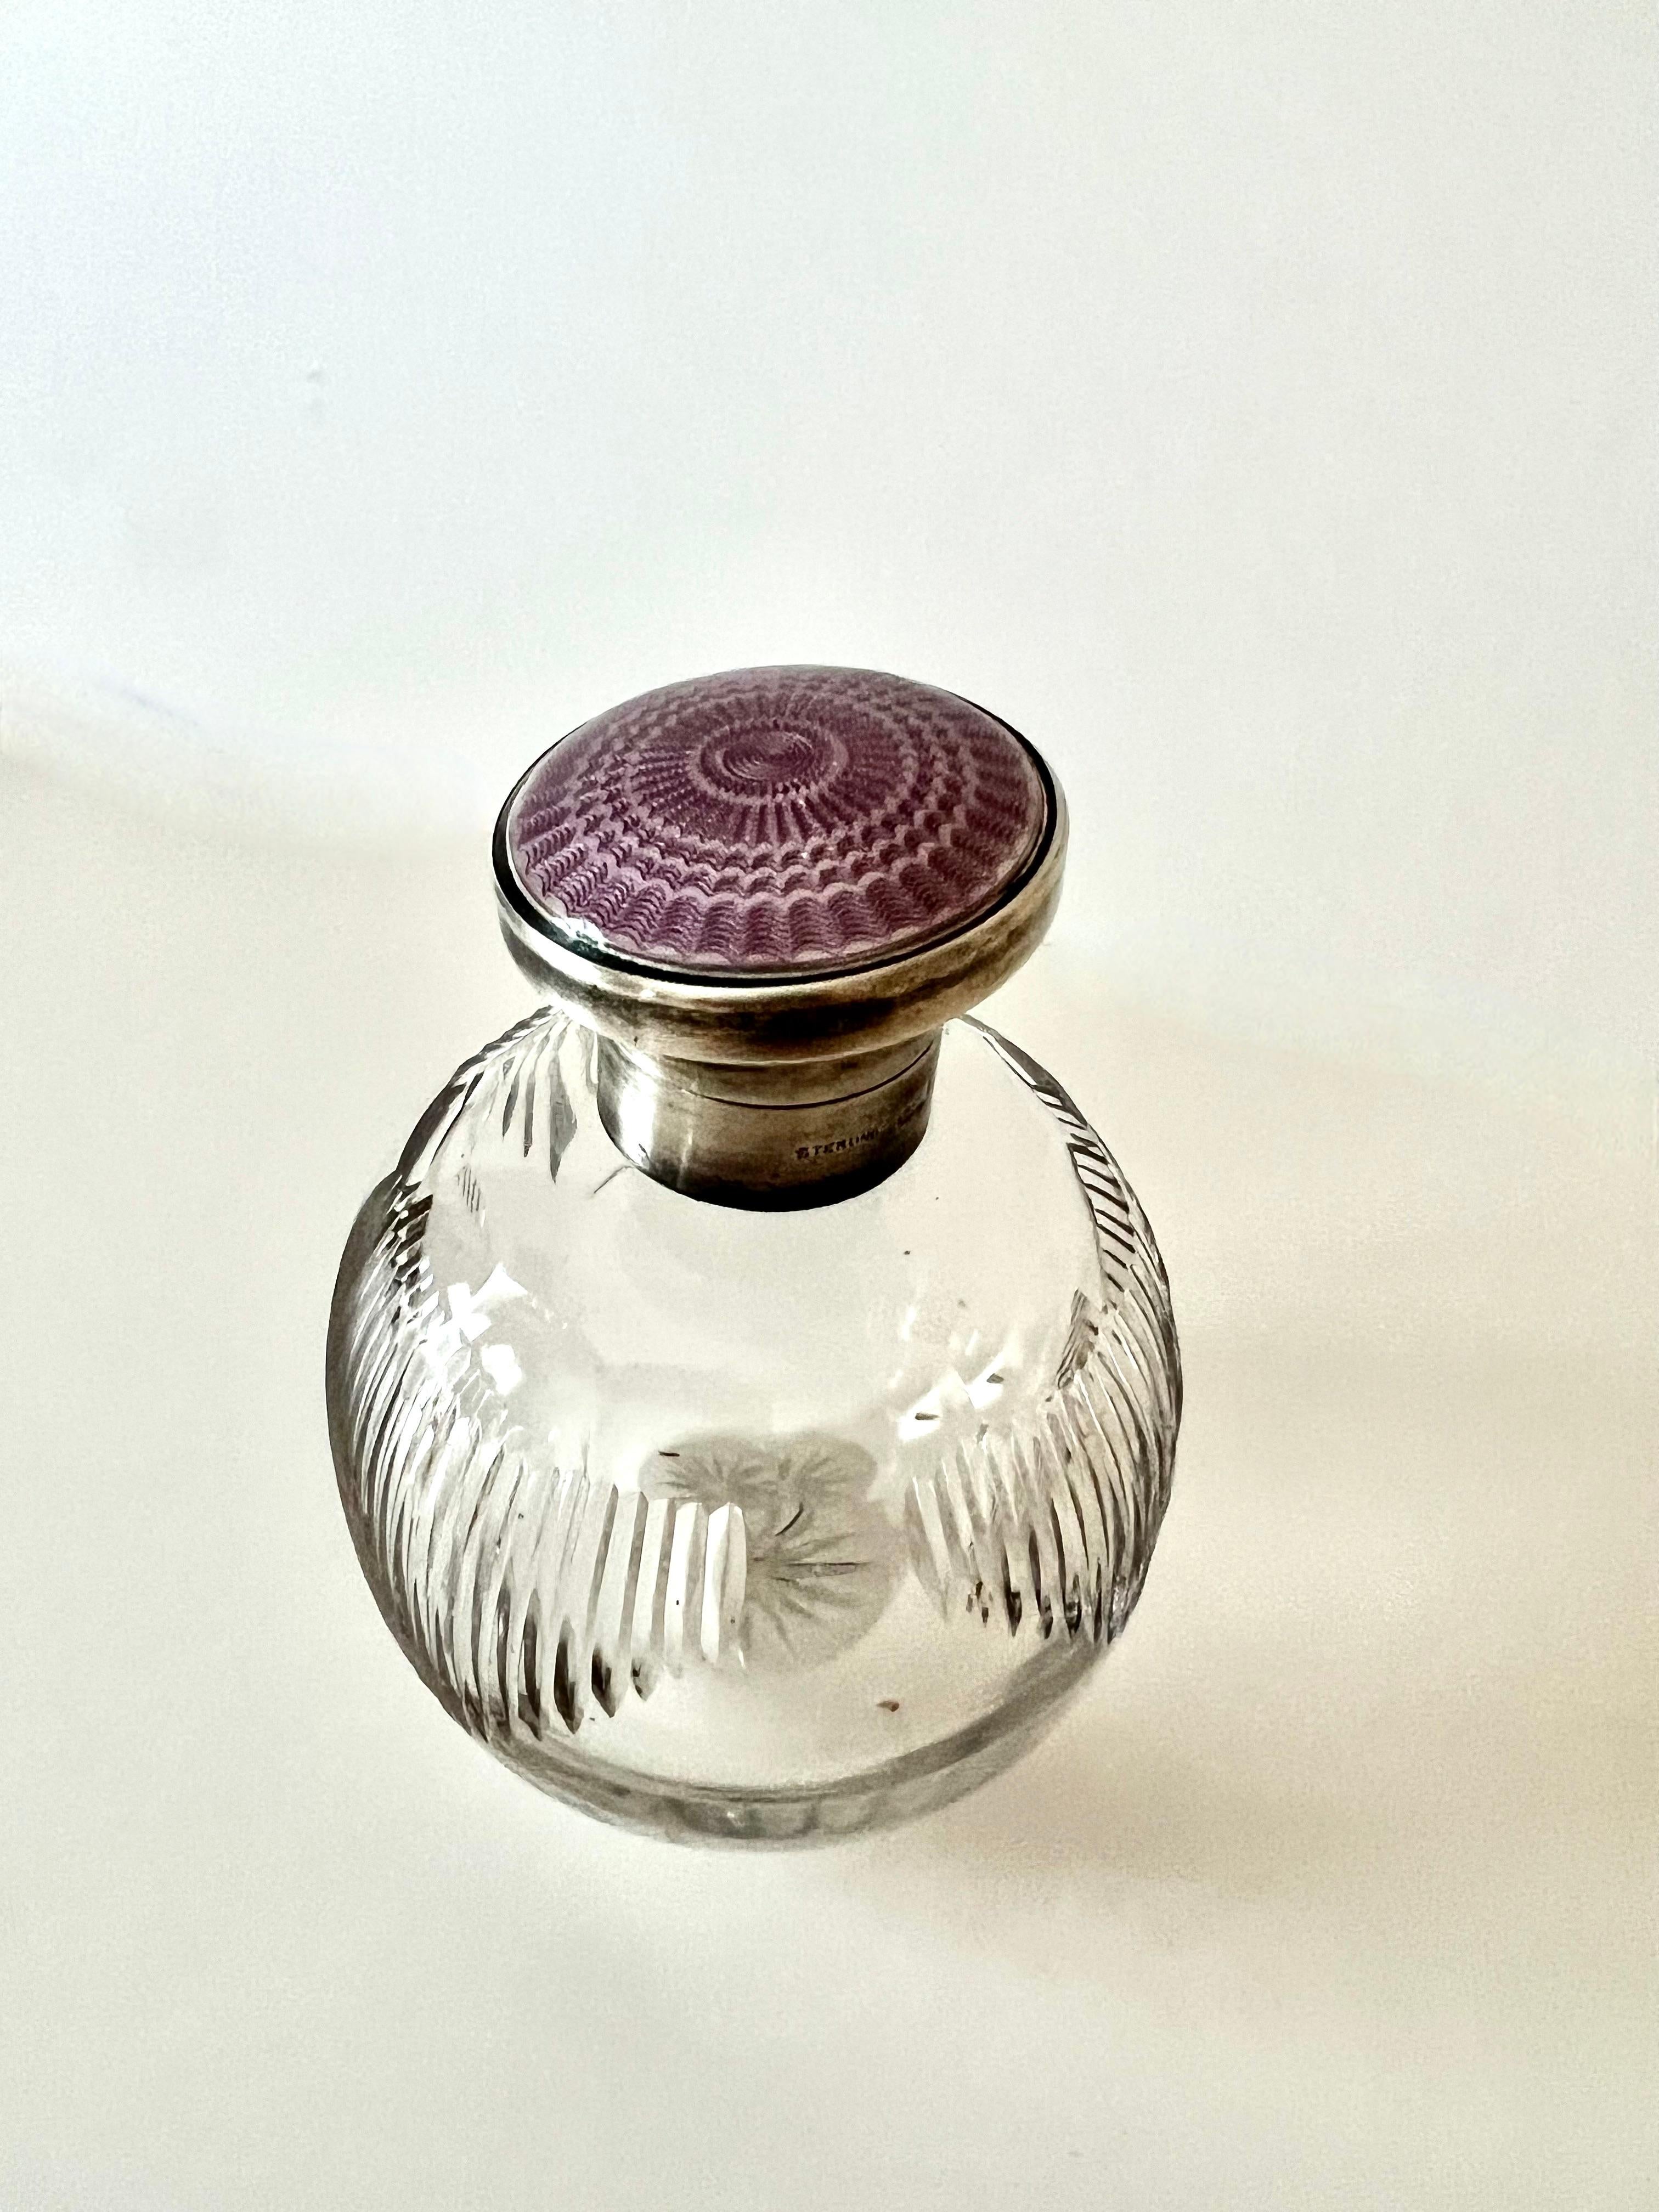 Hand-Crafted Crystal Perfume Bottle with Sterling Lidded Guilloché Lavendar Enamel For Sale